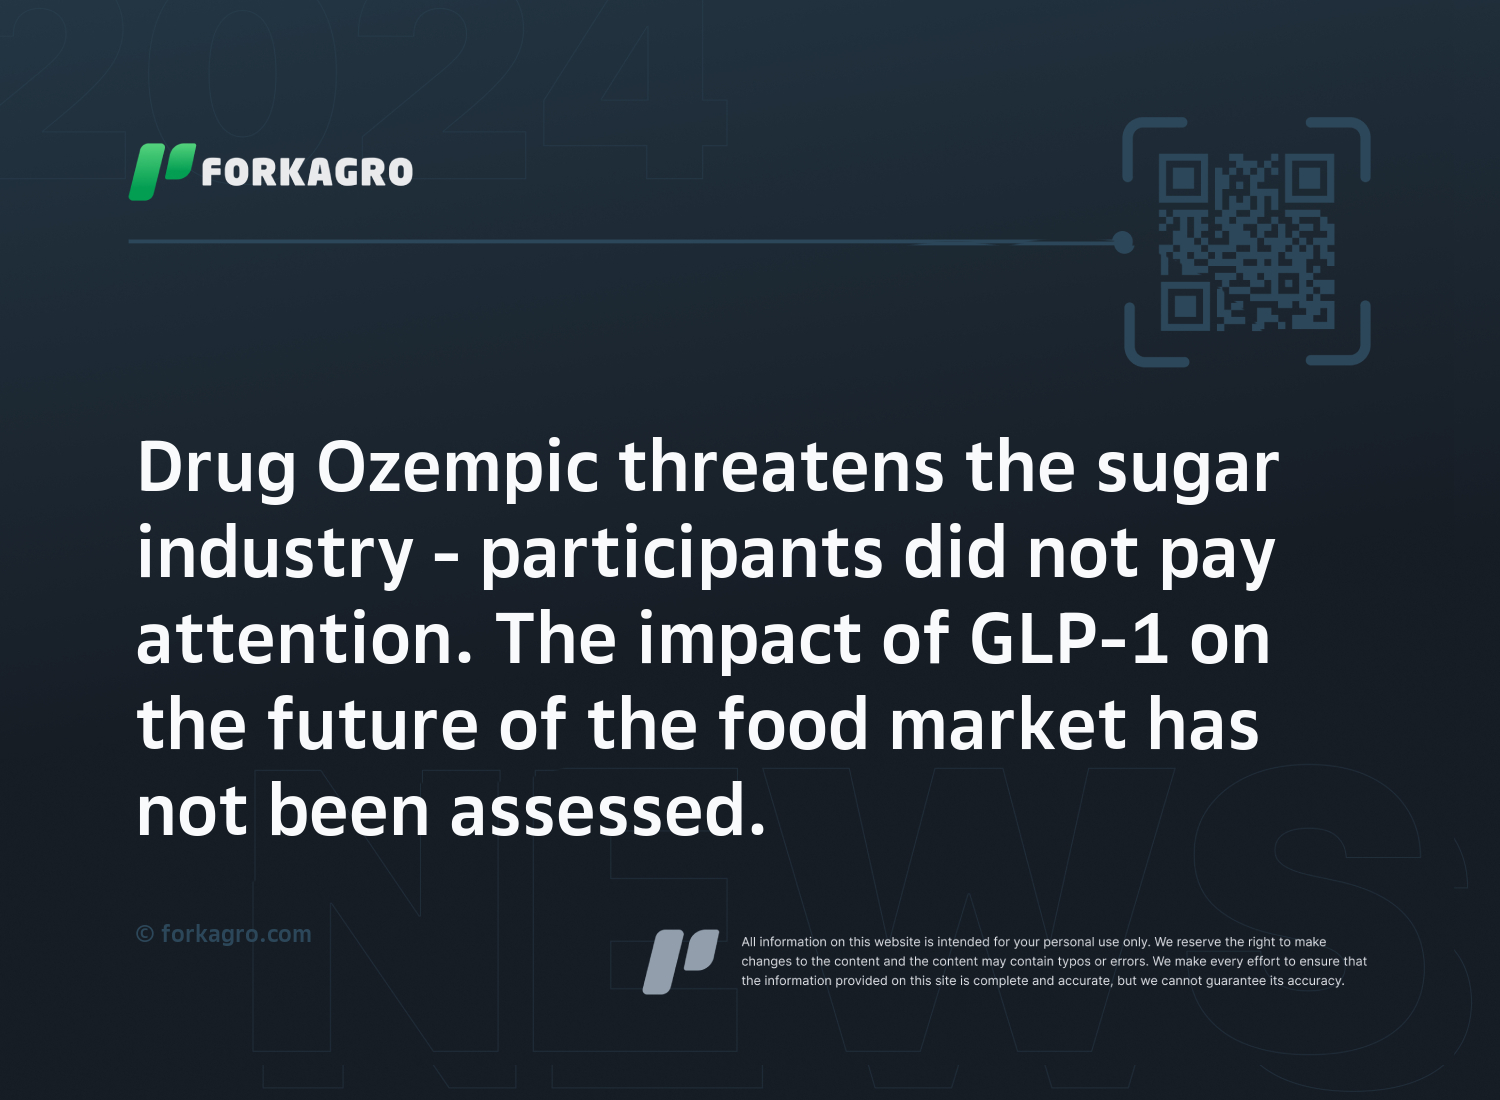 Drug Ozempic threatens the sugar industry - participants did not pay attention. The impact of GLP-1 on the future of the food market has not been assessed.